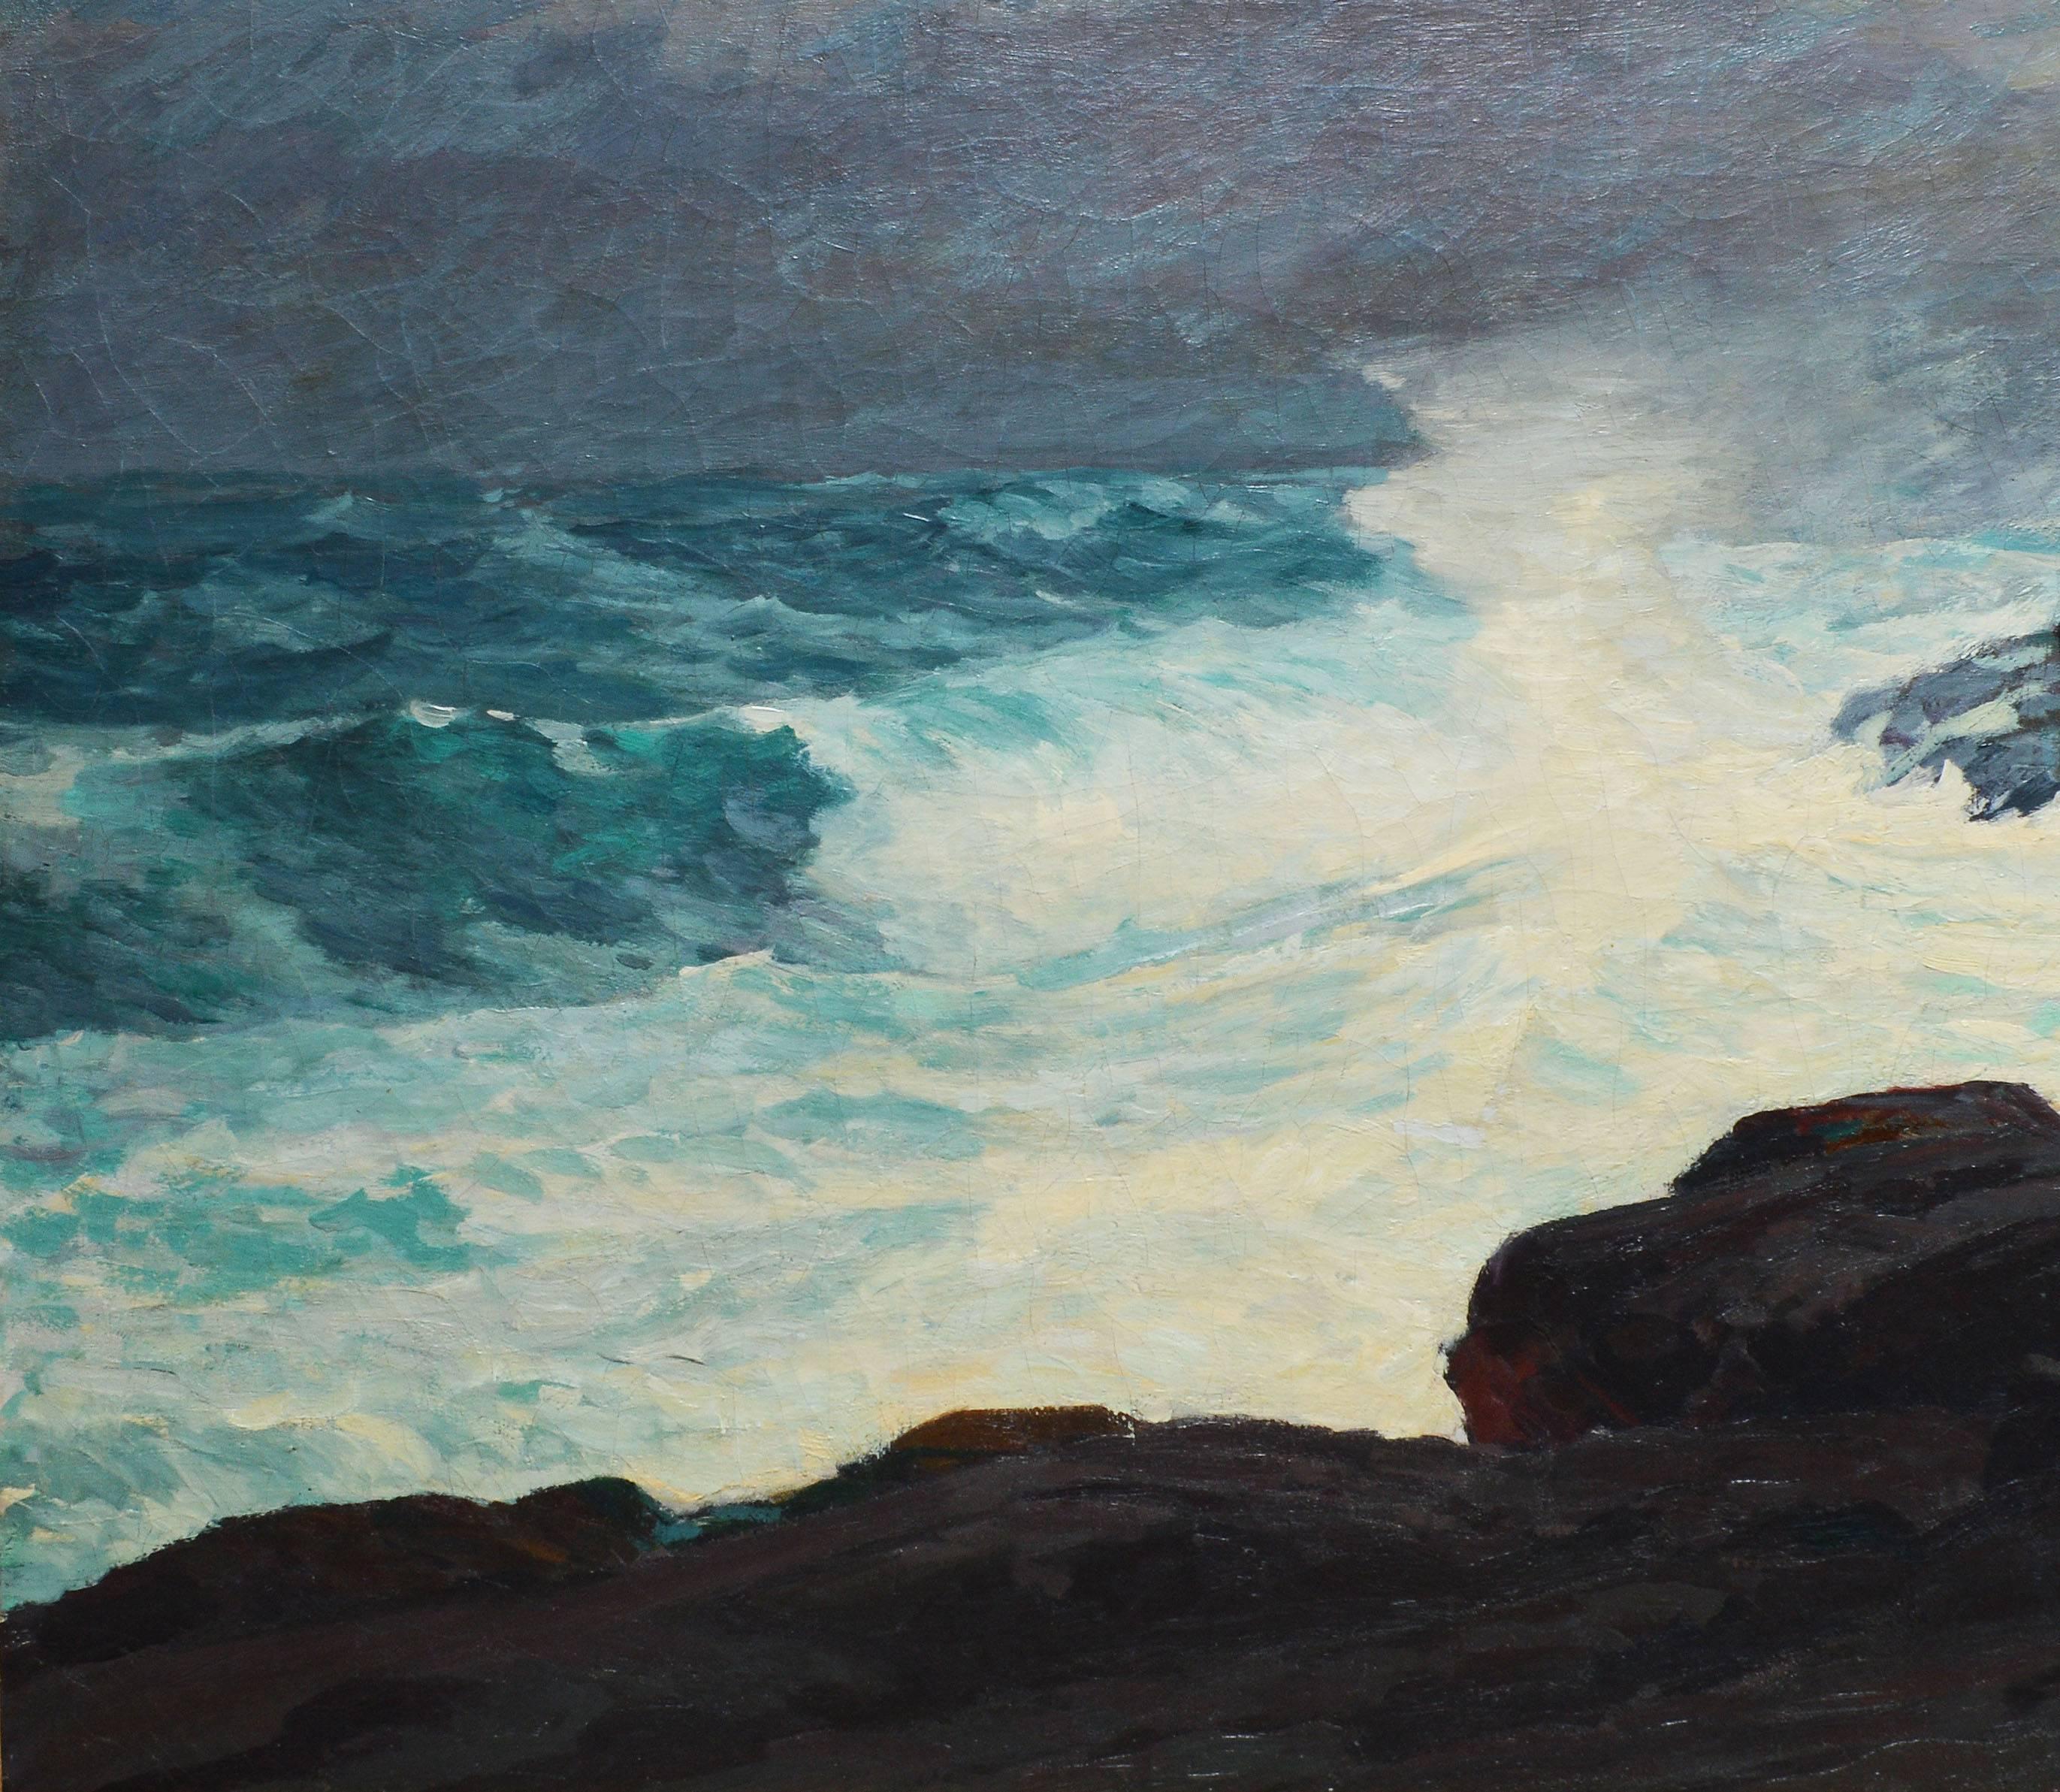 Large seascape oil painting with crashing surf by Paul Dougherty  (1877 - 1947).  Oil on canvas, circa 1905.  Signed lower right, 